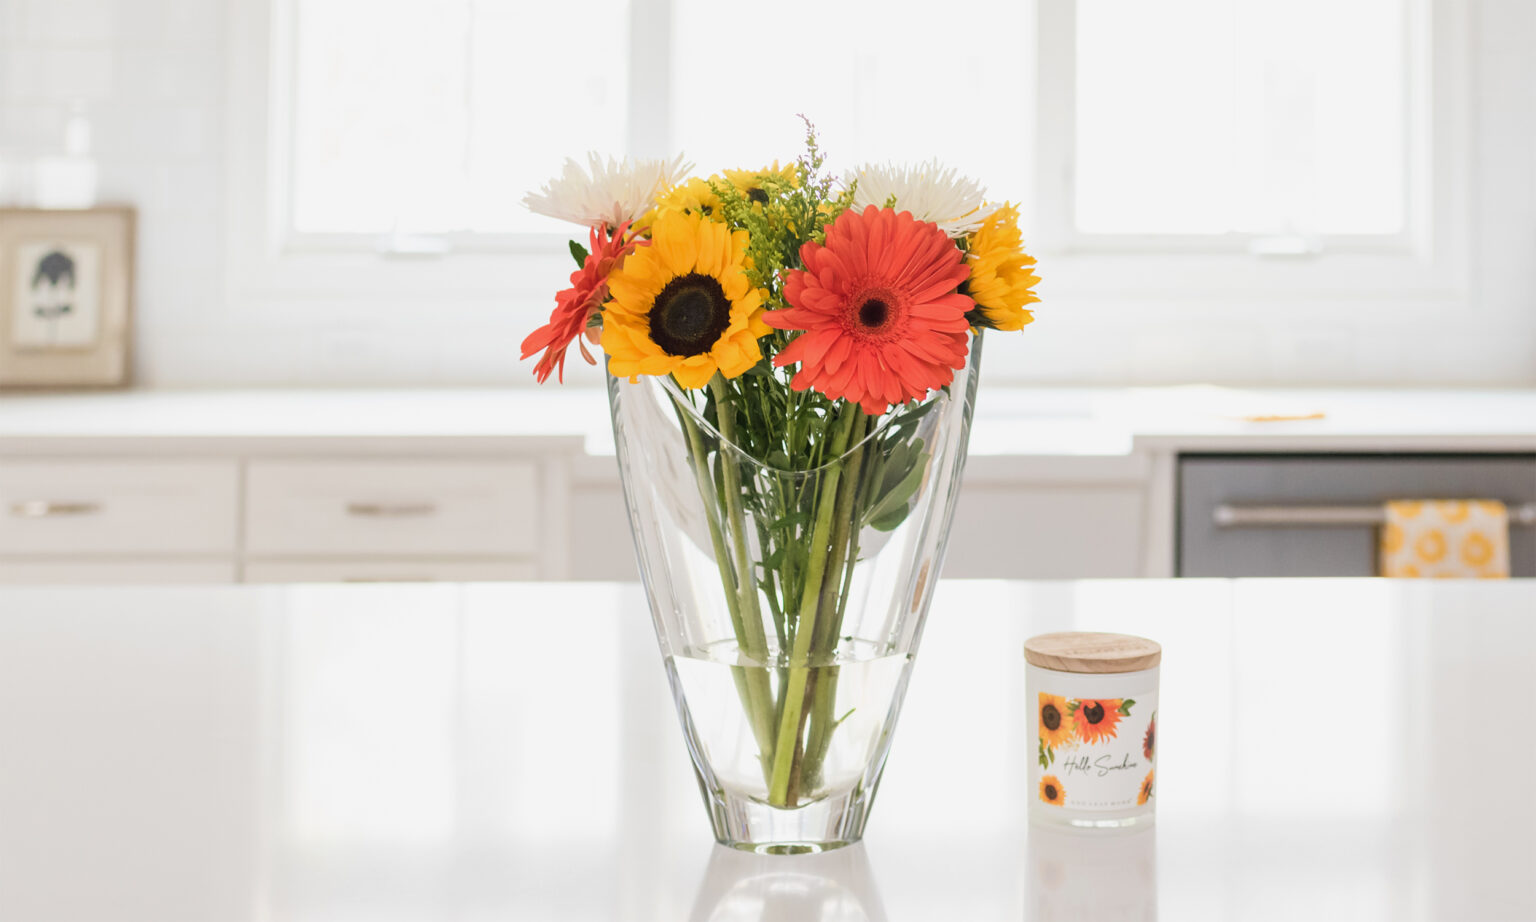 Brightly colored fresh flowers in clean kitchen